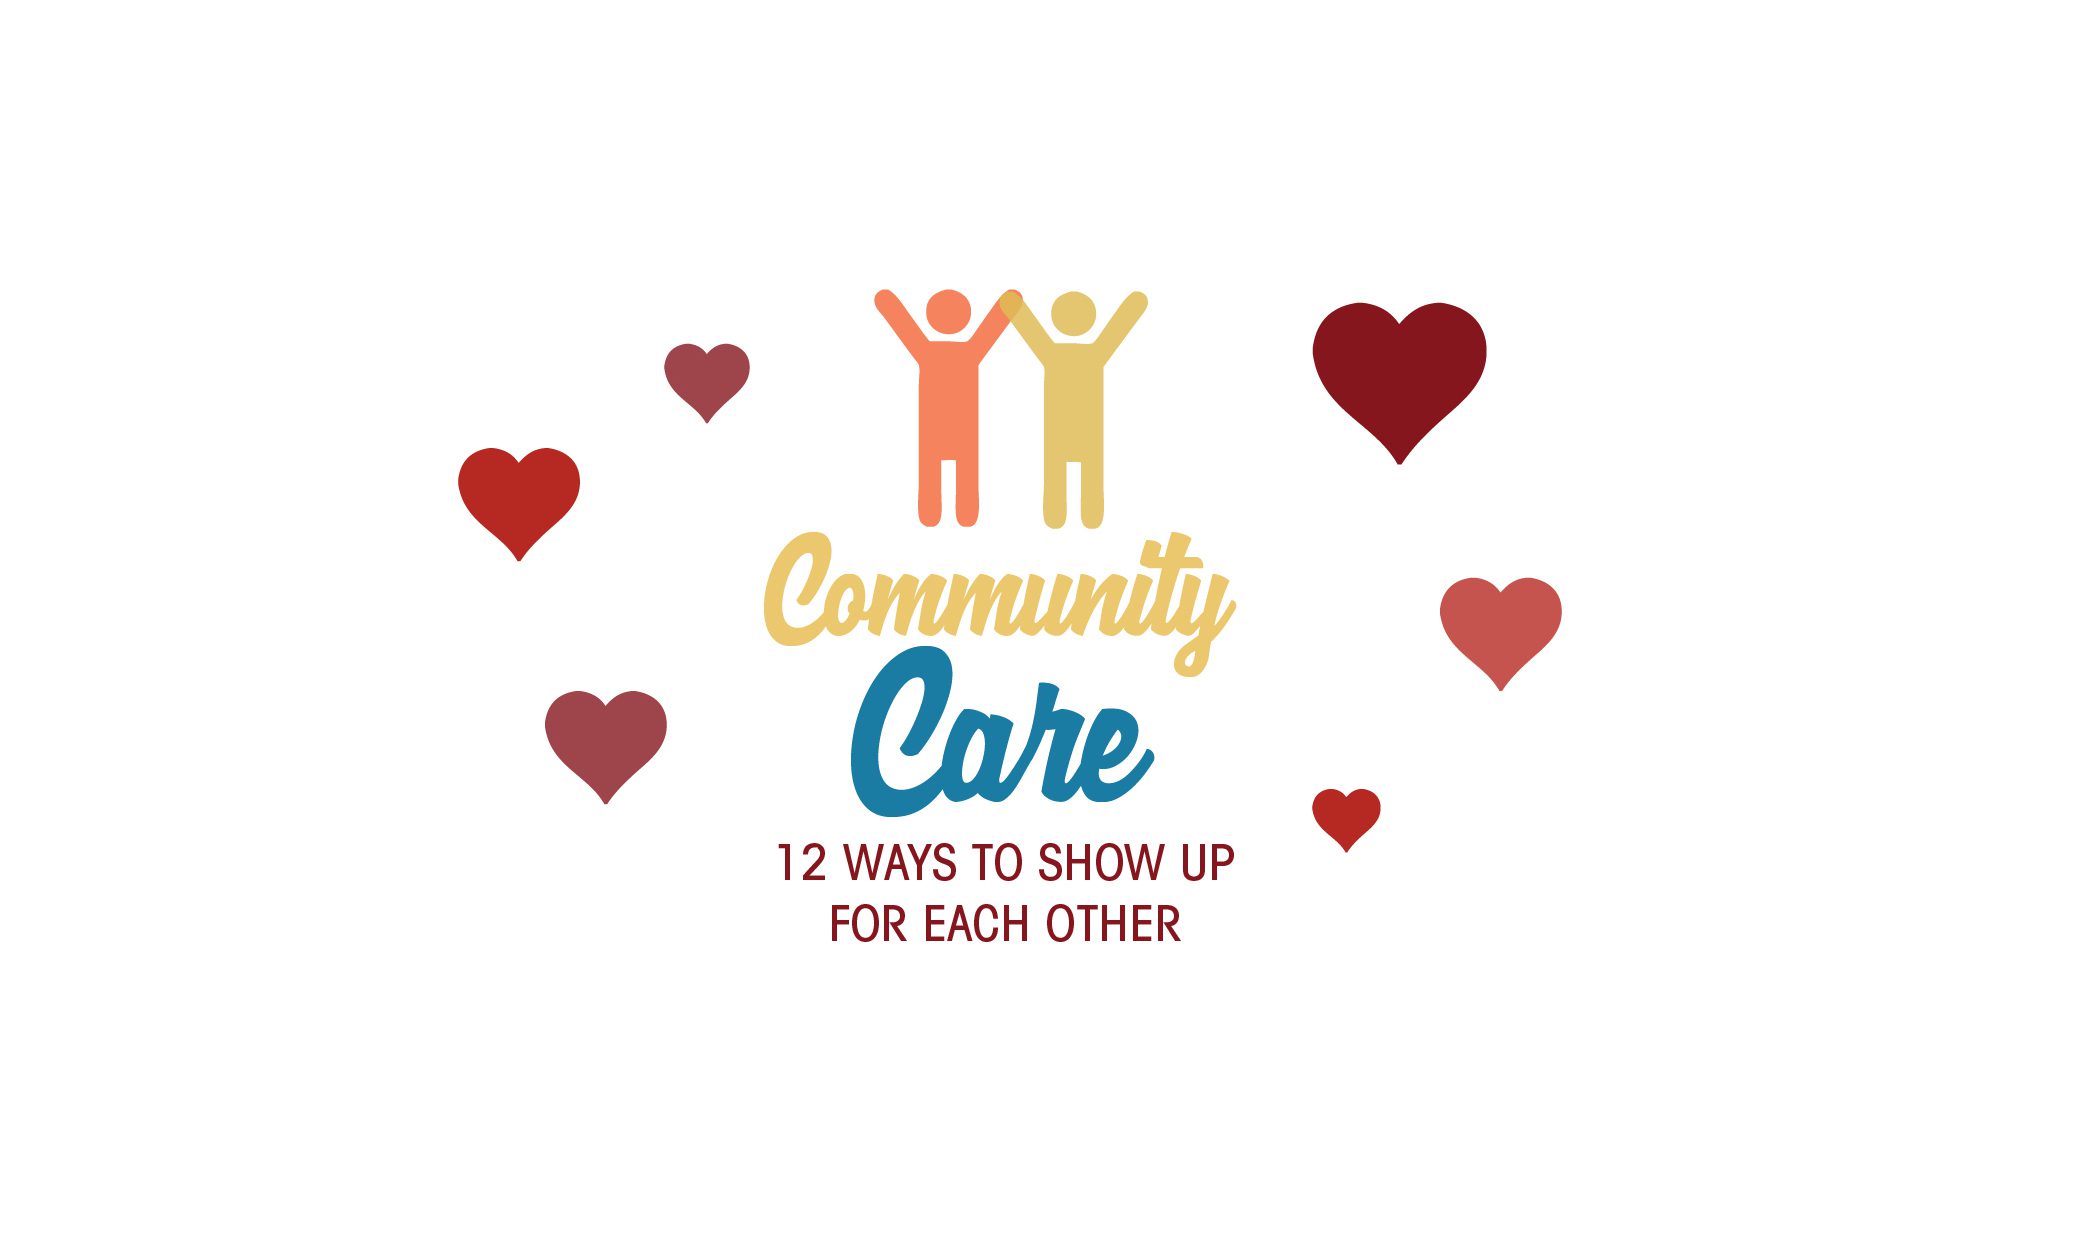 Community Care: 12 Ways to Show Up for Each Other